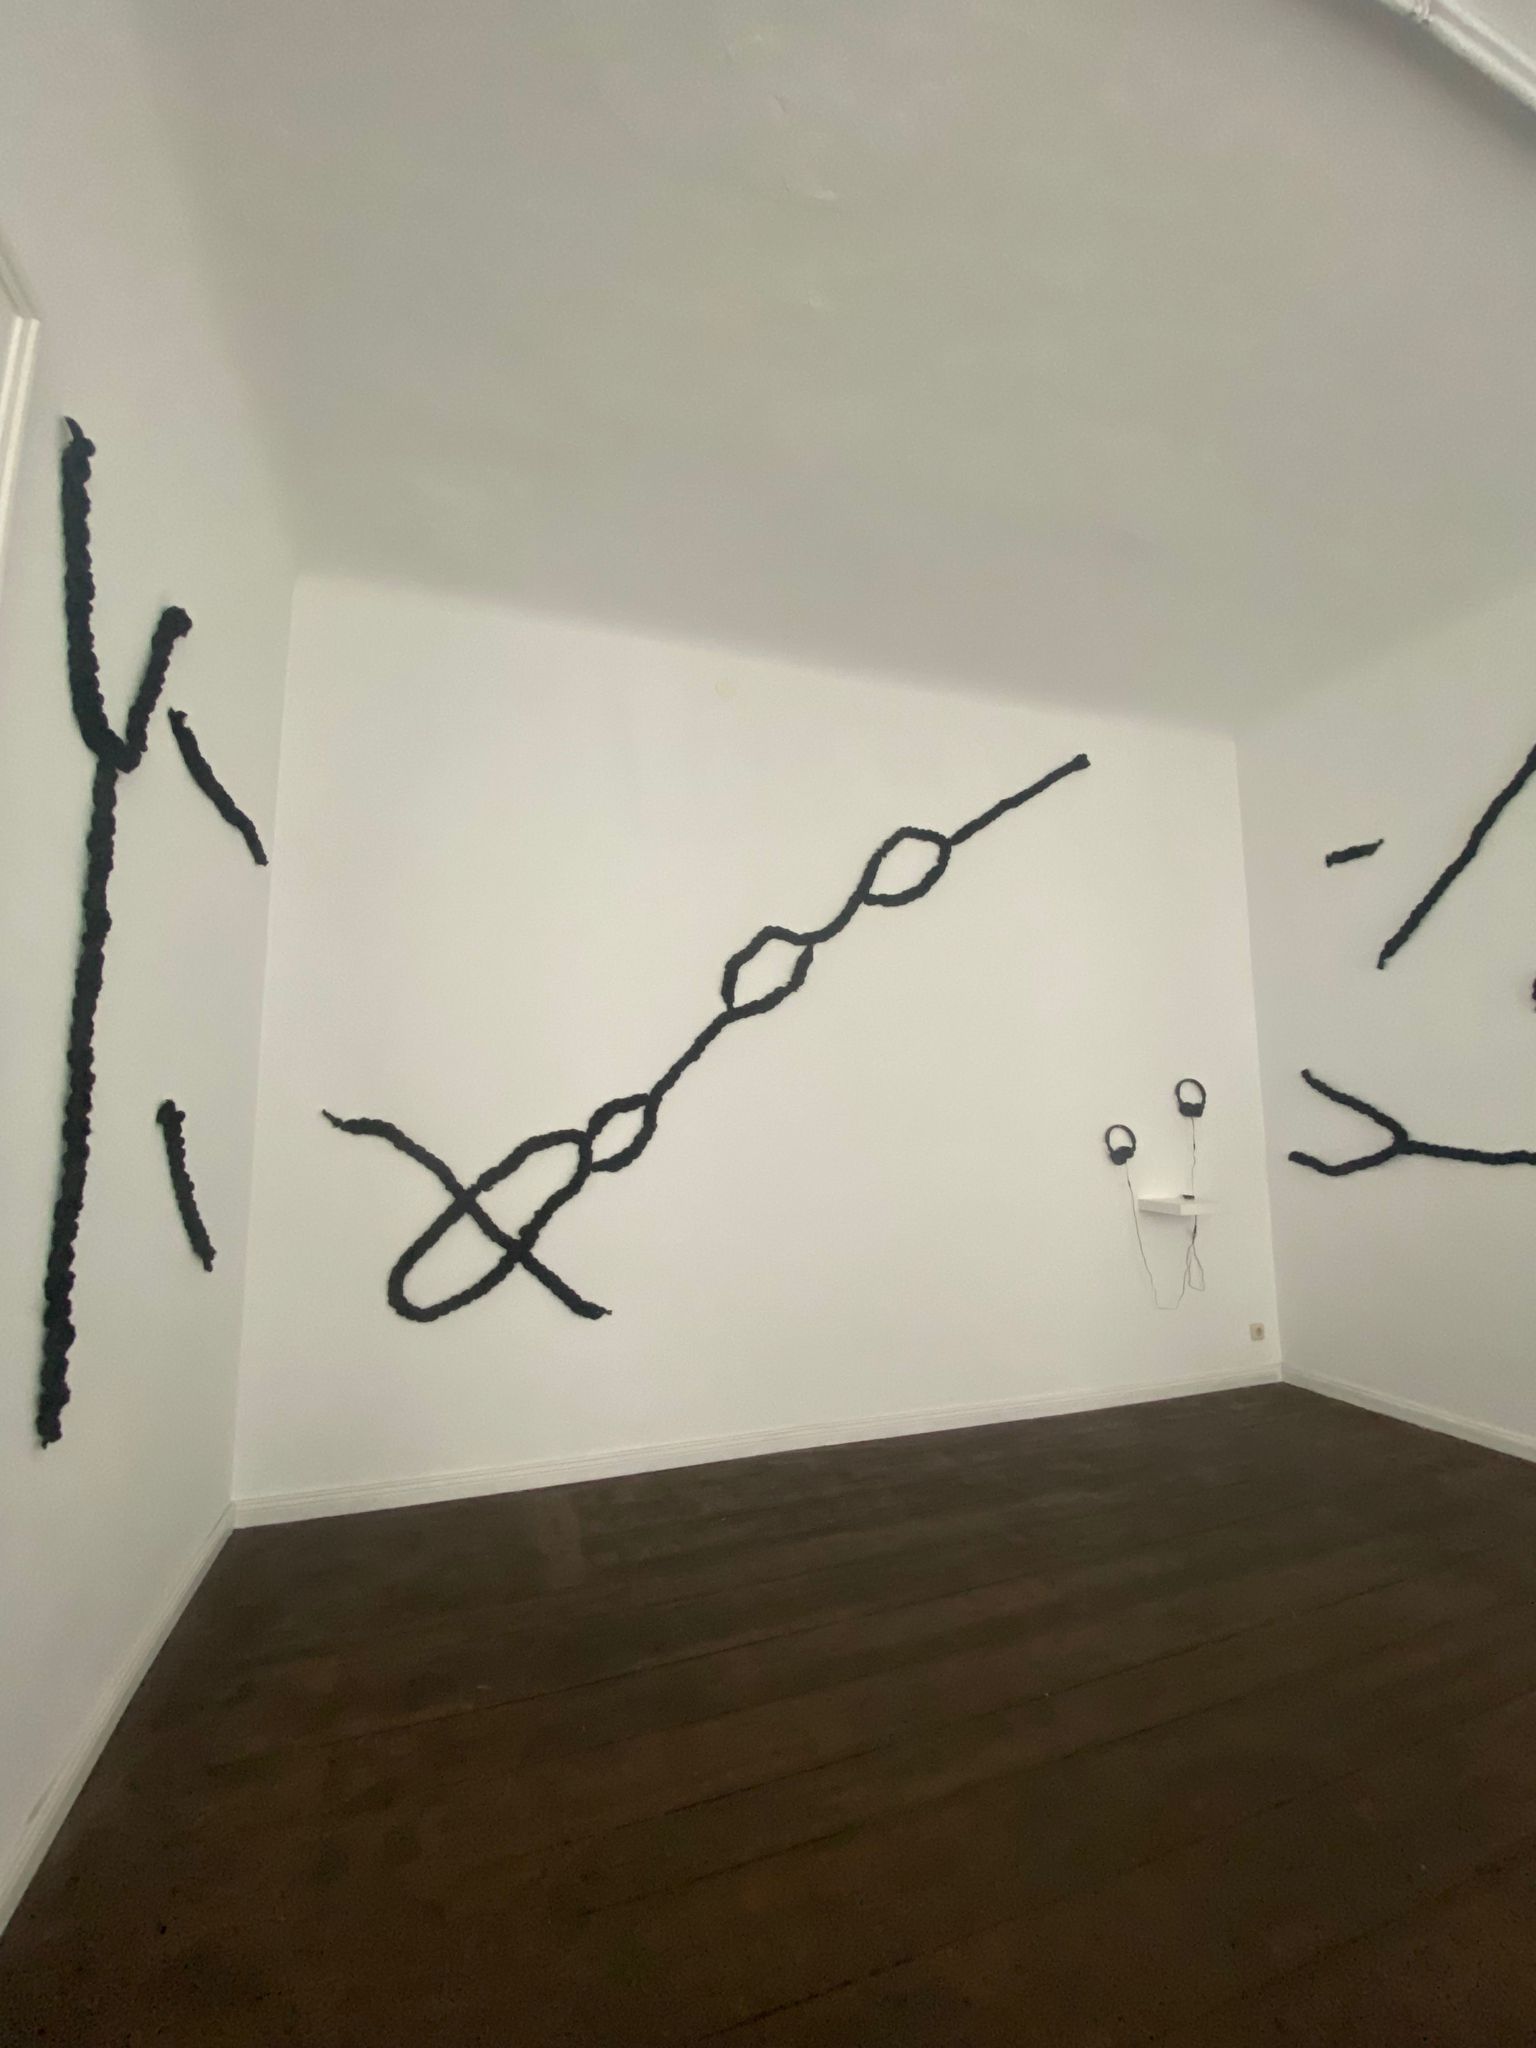 braided hair forms diagrams of streets against white gallery walls.